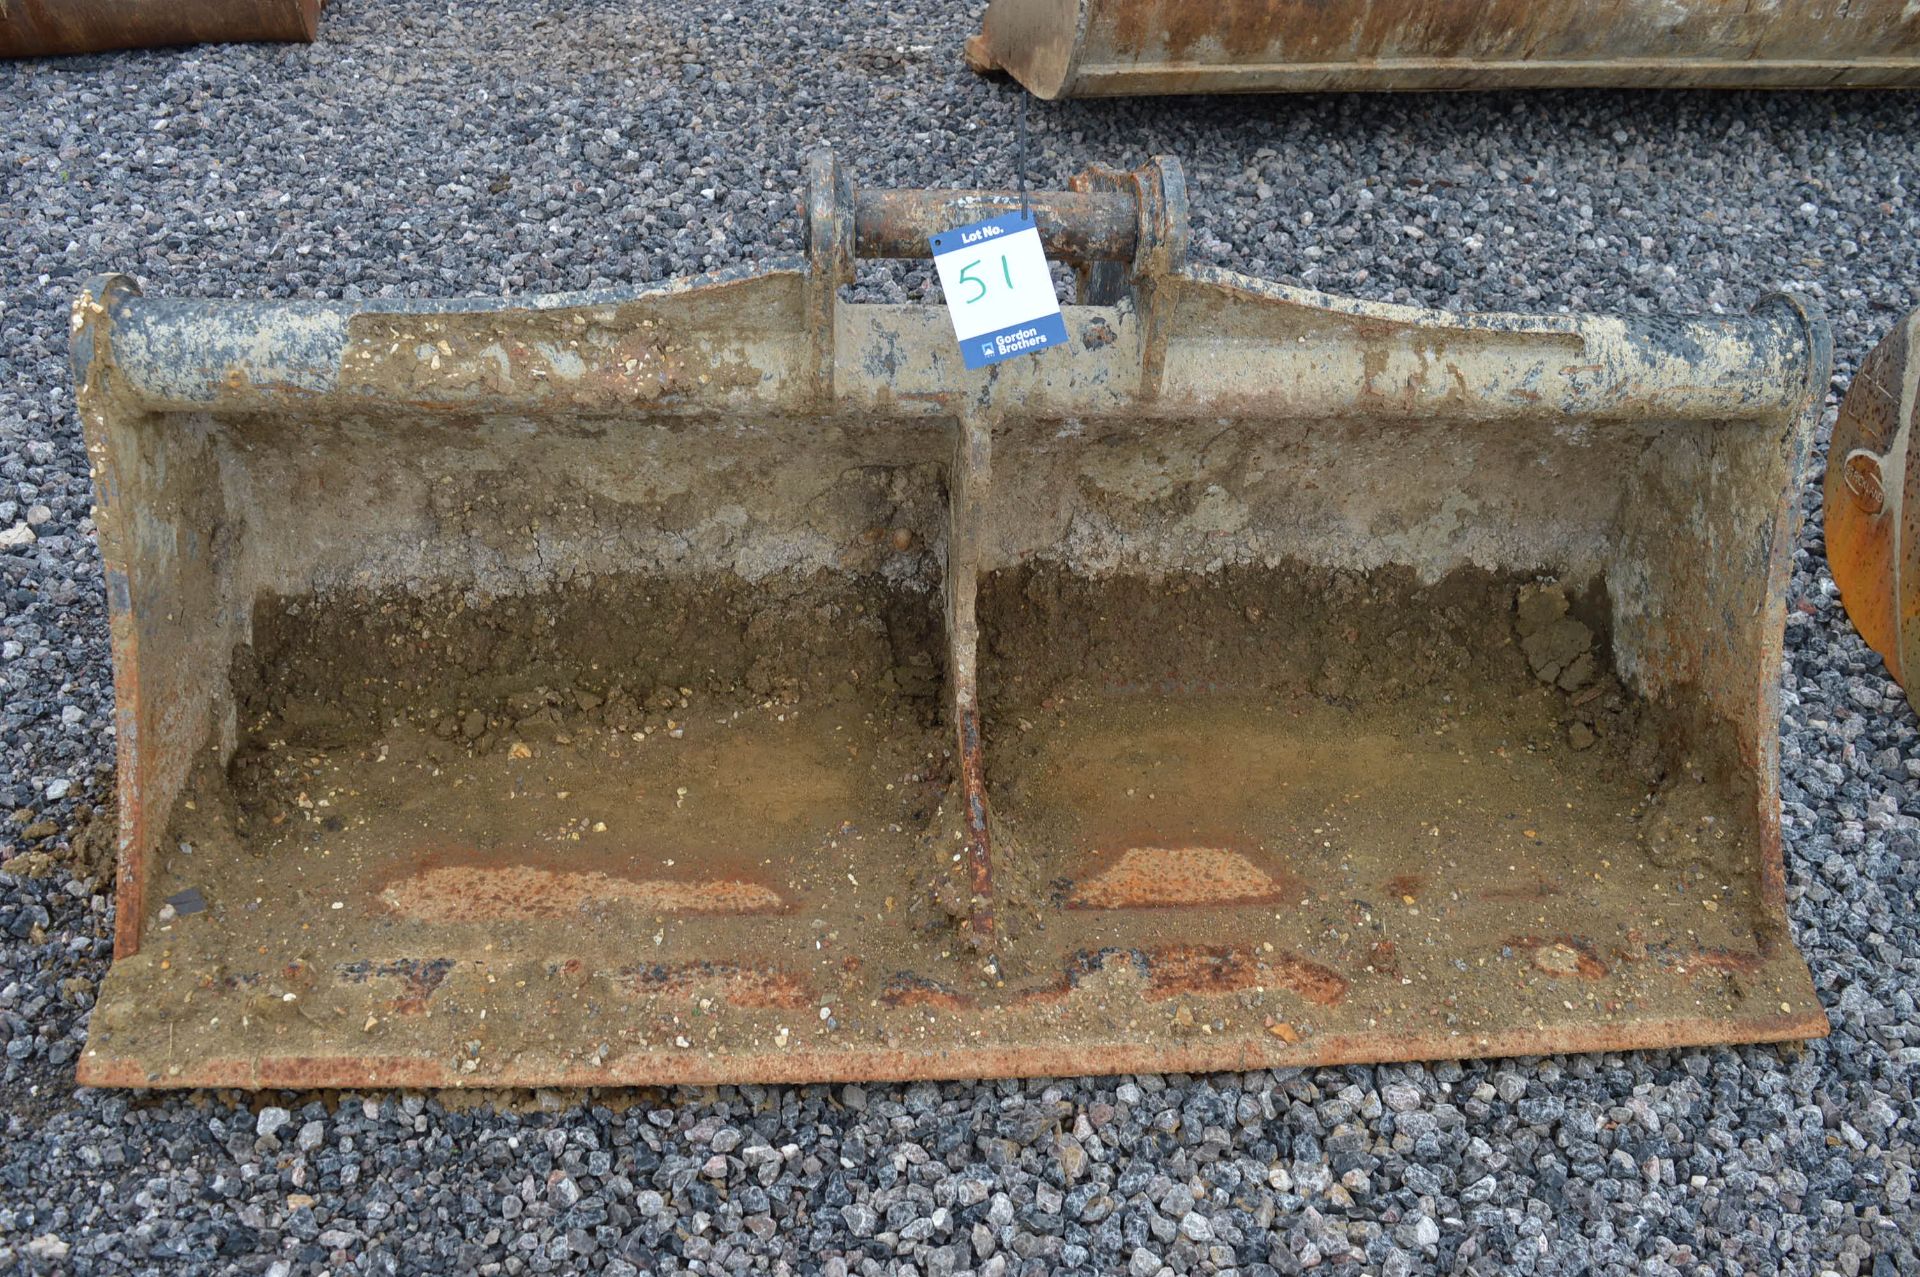 72" general purpose ditching bucket suitable for a